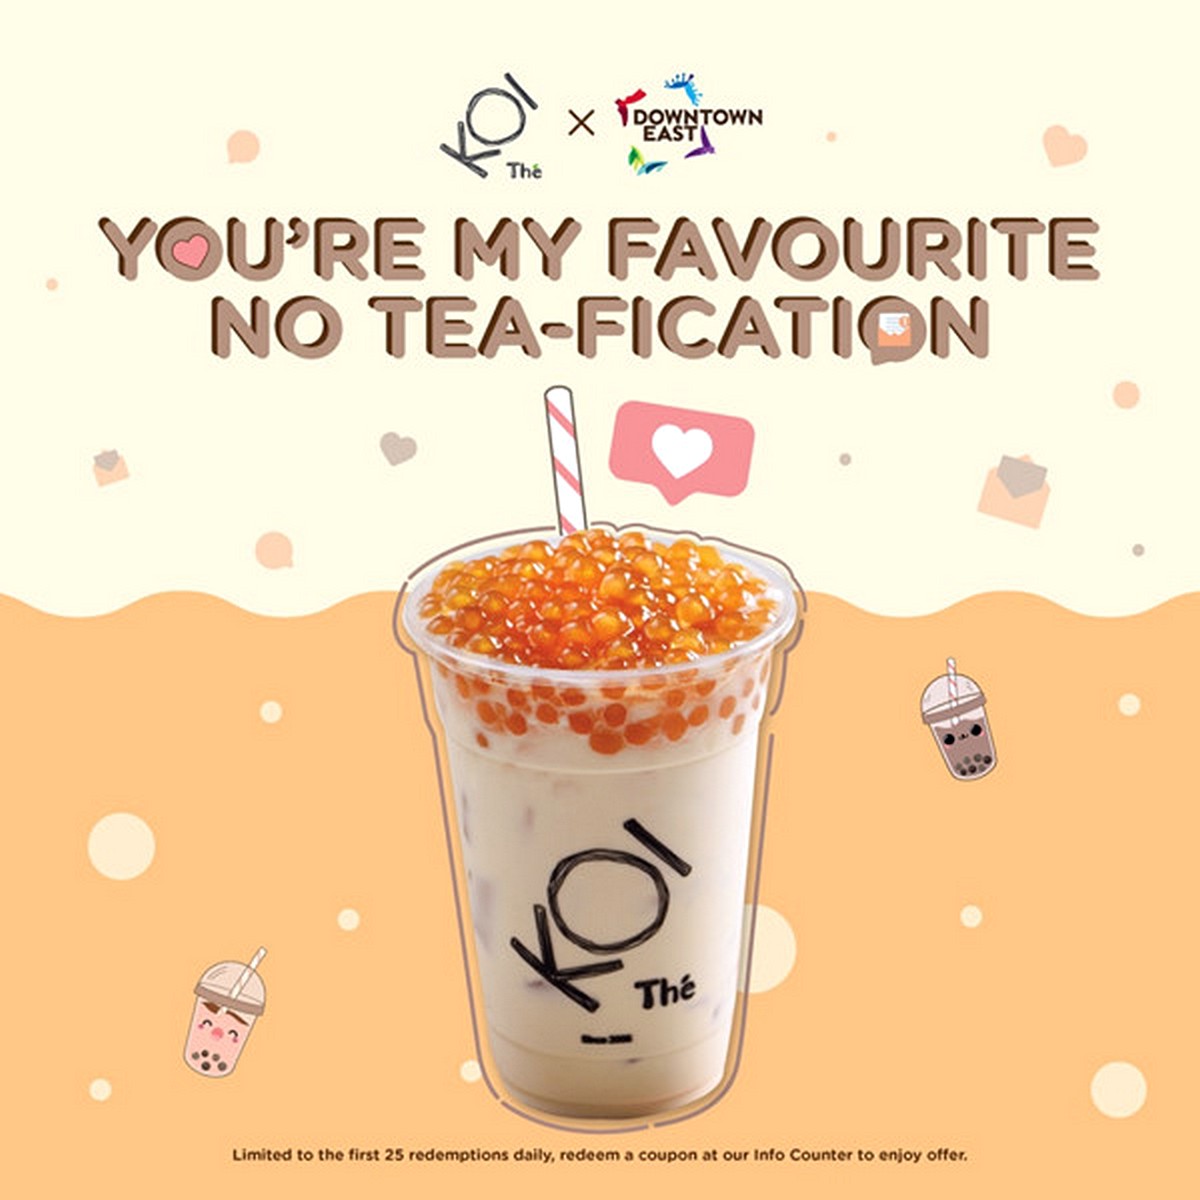 Downtown-East-Free-Bubble-Tea-Promotion-2020-Giveaway-Freebies-2021-Discounts-Offers-006 16-31 Mar 2020: Downtown East FREE Bubble Tea Promotion! KOI The, Kung Fu Tea, Each A Cup, Tea Valley & Yocha!